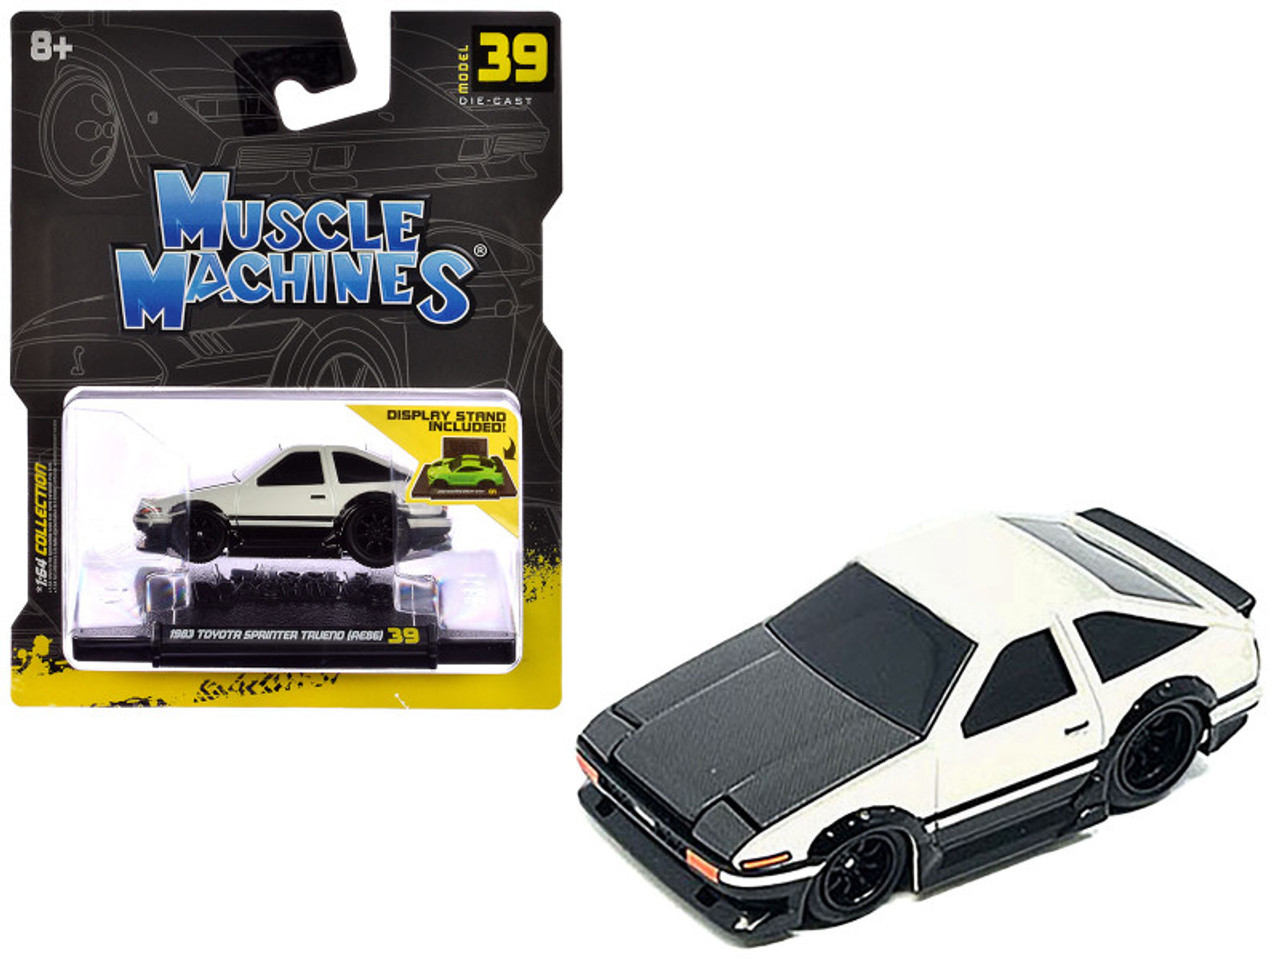 1983 Toyota Sprinter Trueno (AE86) White with Carbon Hood 1/64 Diecast Model Car by Muscle Machines